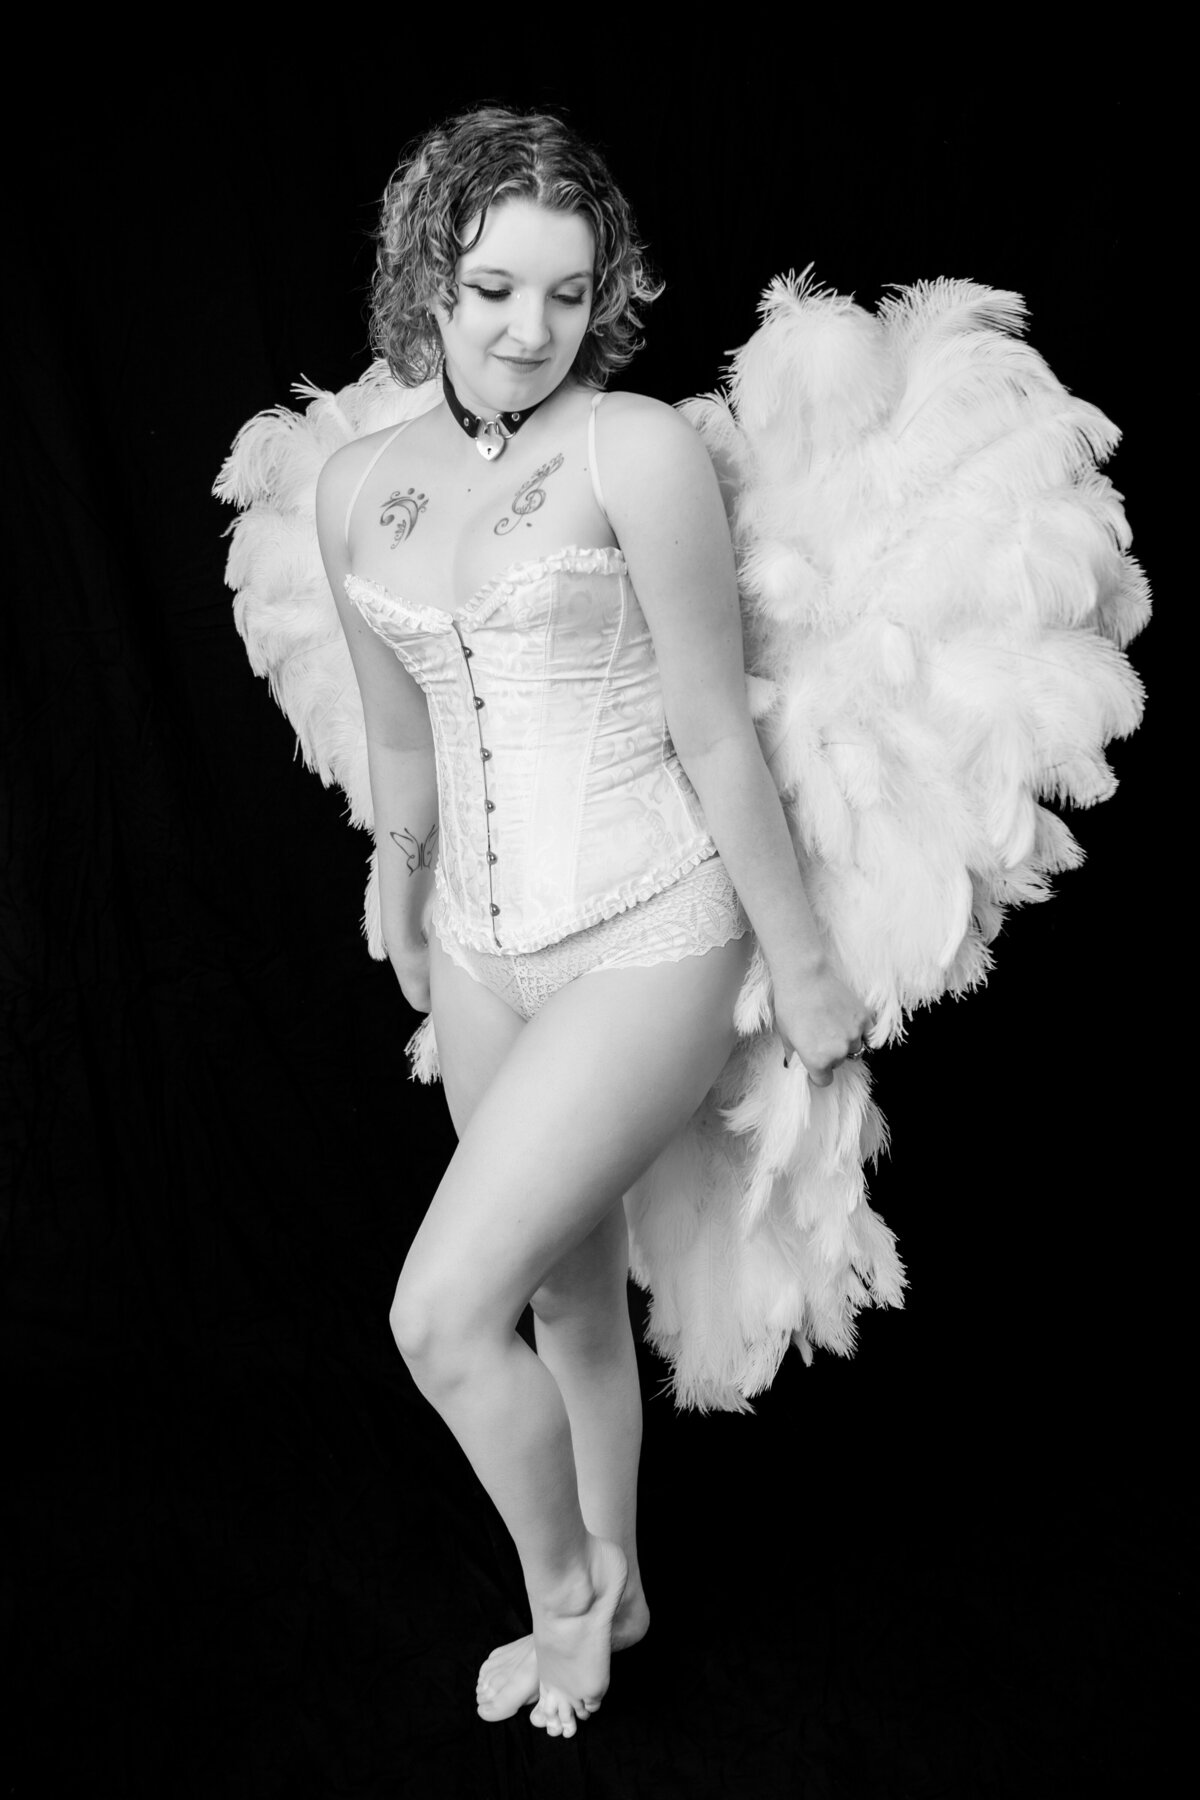 Boudoir photo with angel wings